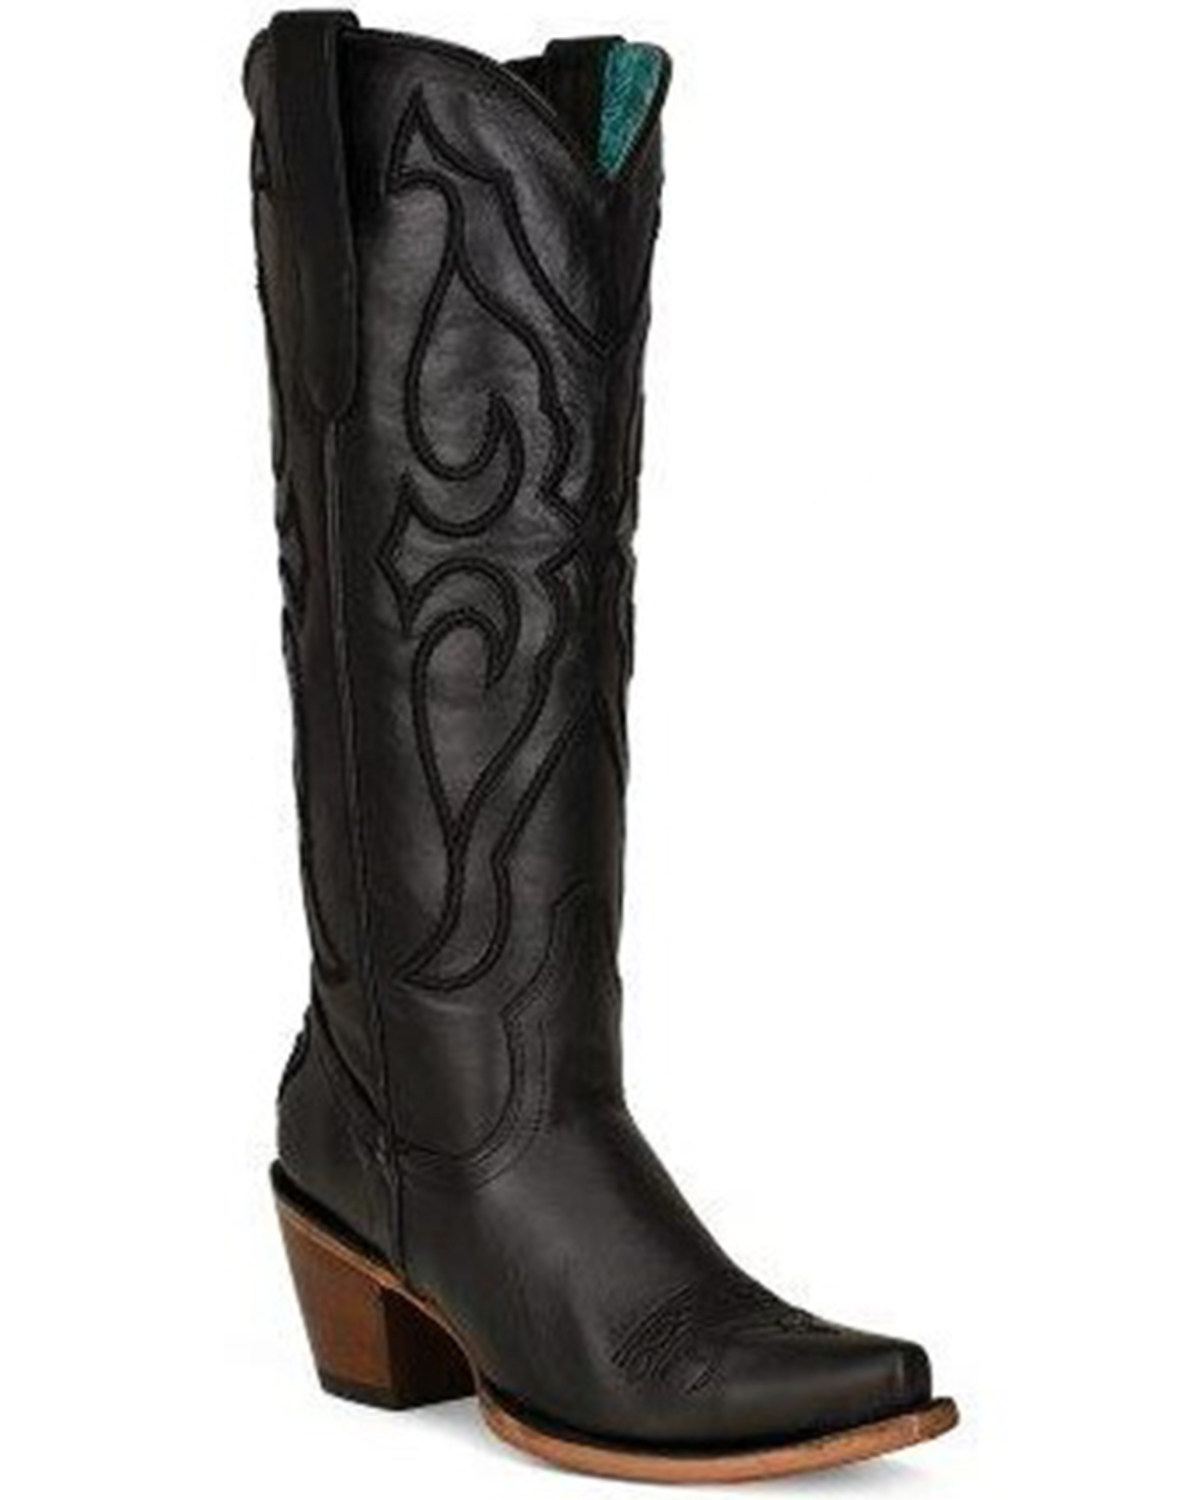 Corral Women's Matching Stitch Pattern & Inlay Tall Western Boots - Snip Toe